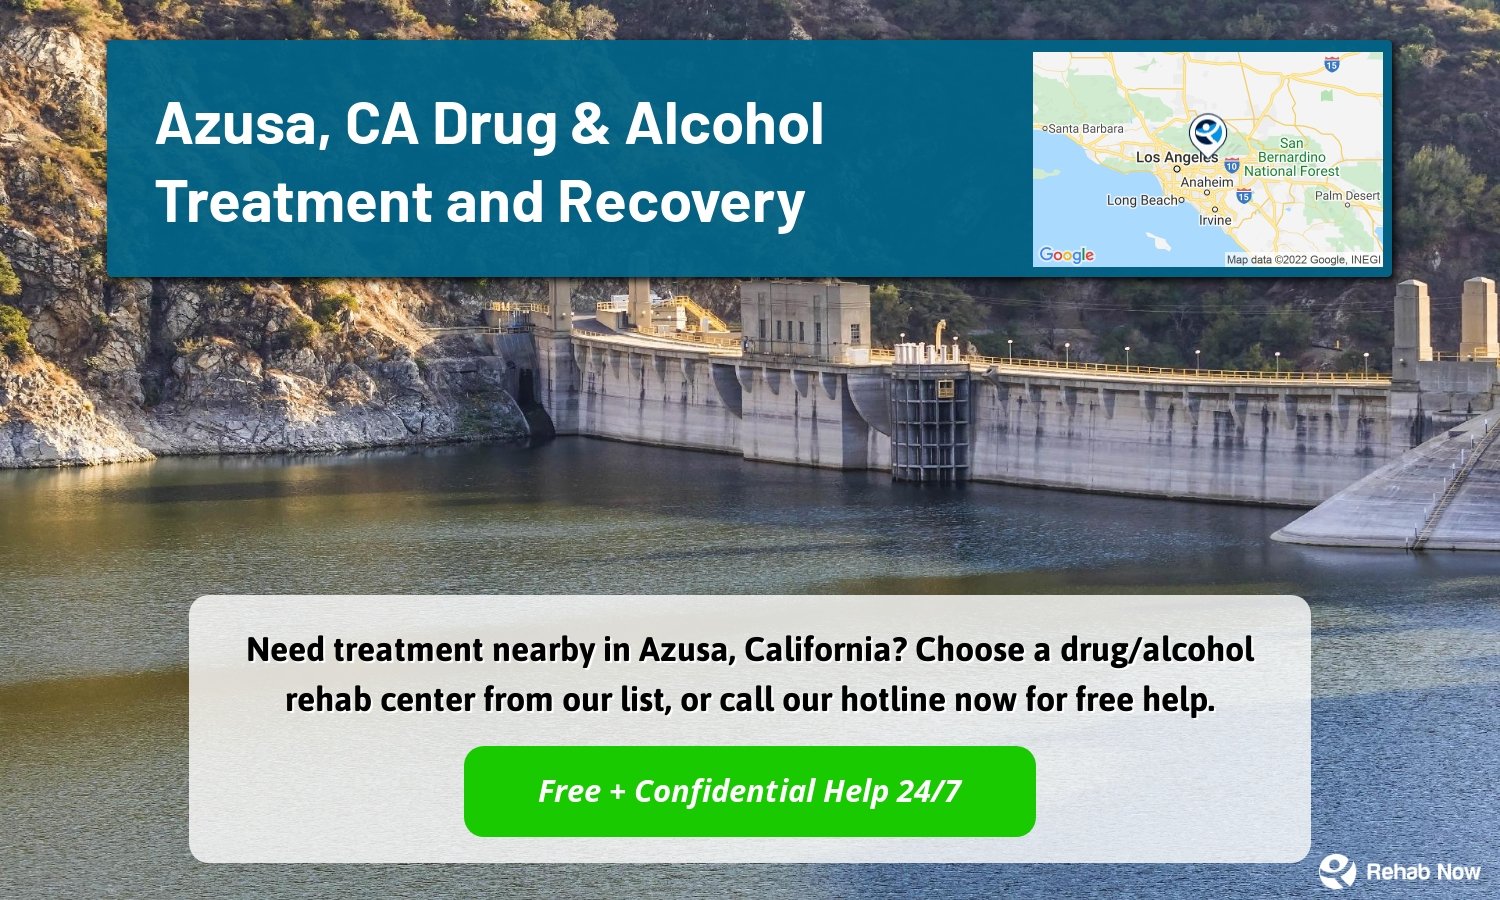 Need treatment nearby in Azusa, California? Choose a drug/alcohol rehab center from our list, or call our hotline now for free help.